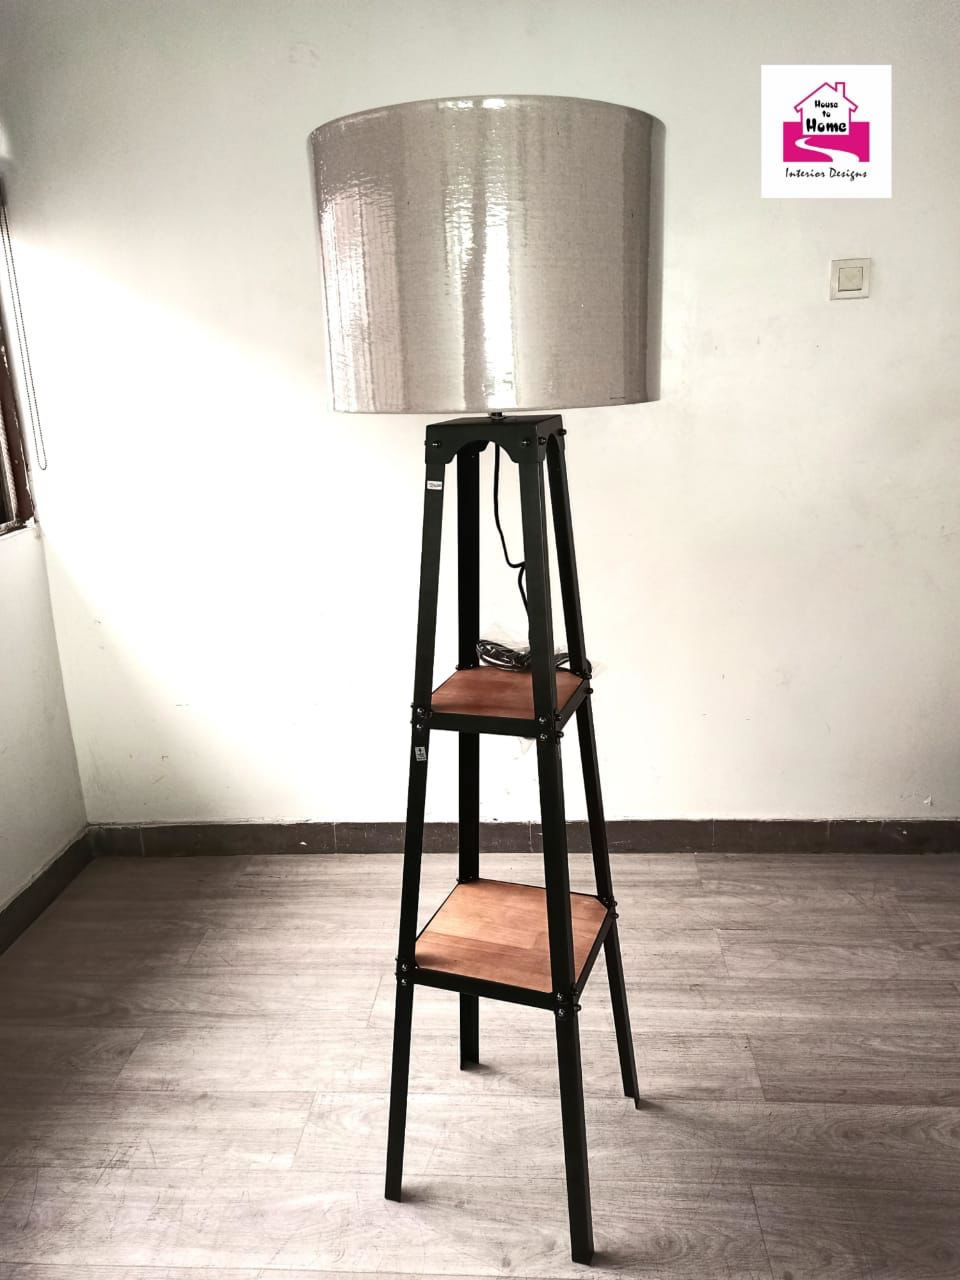 Tripod Standing lamp with wooden racks.